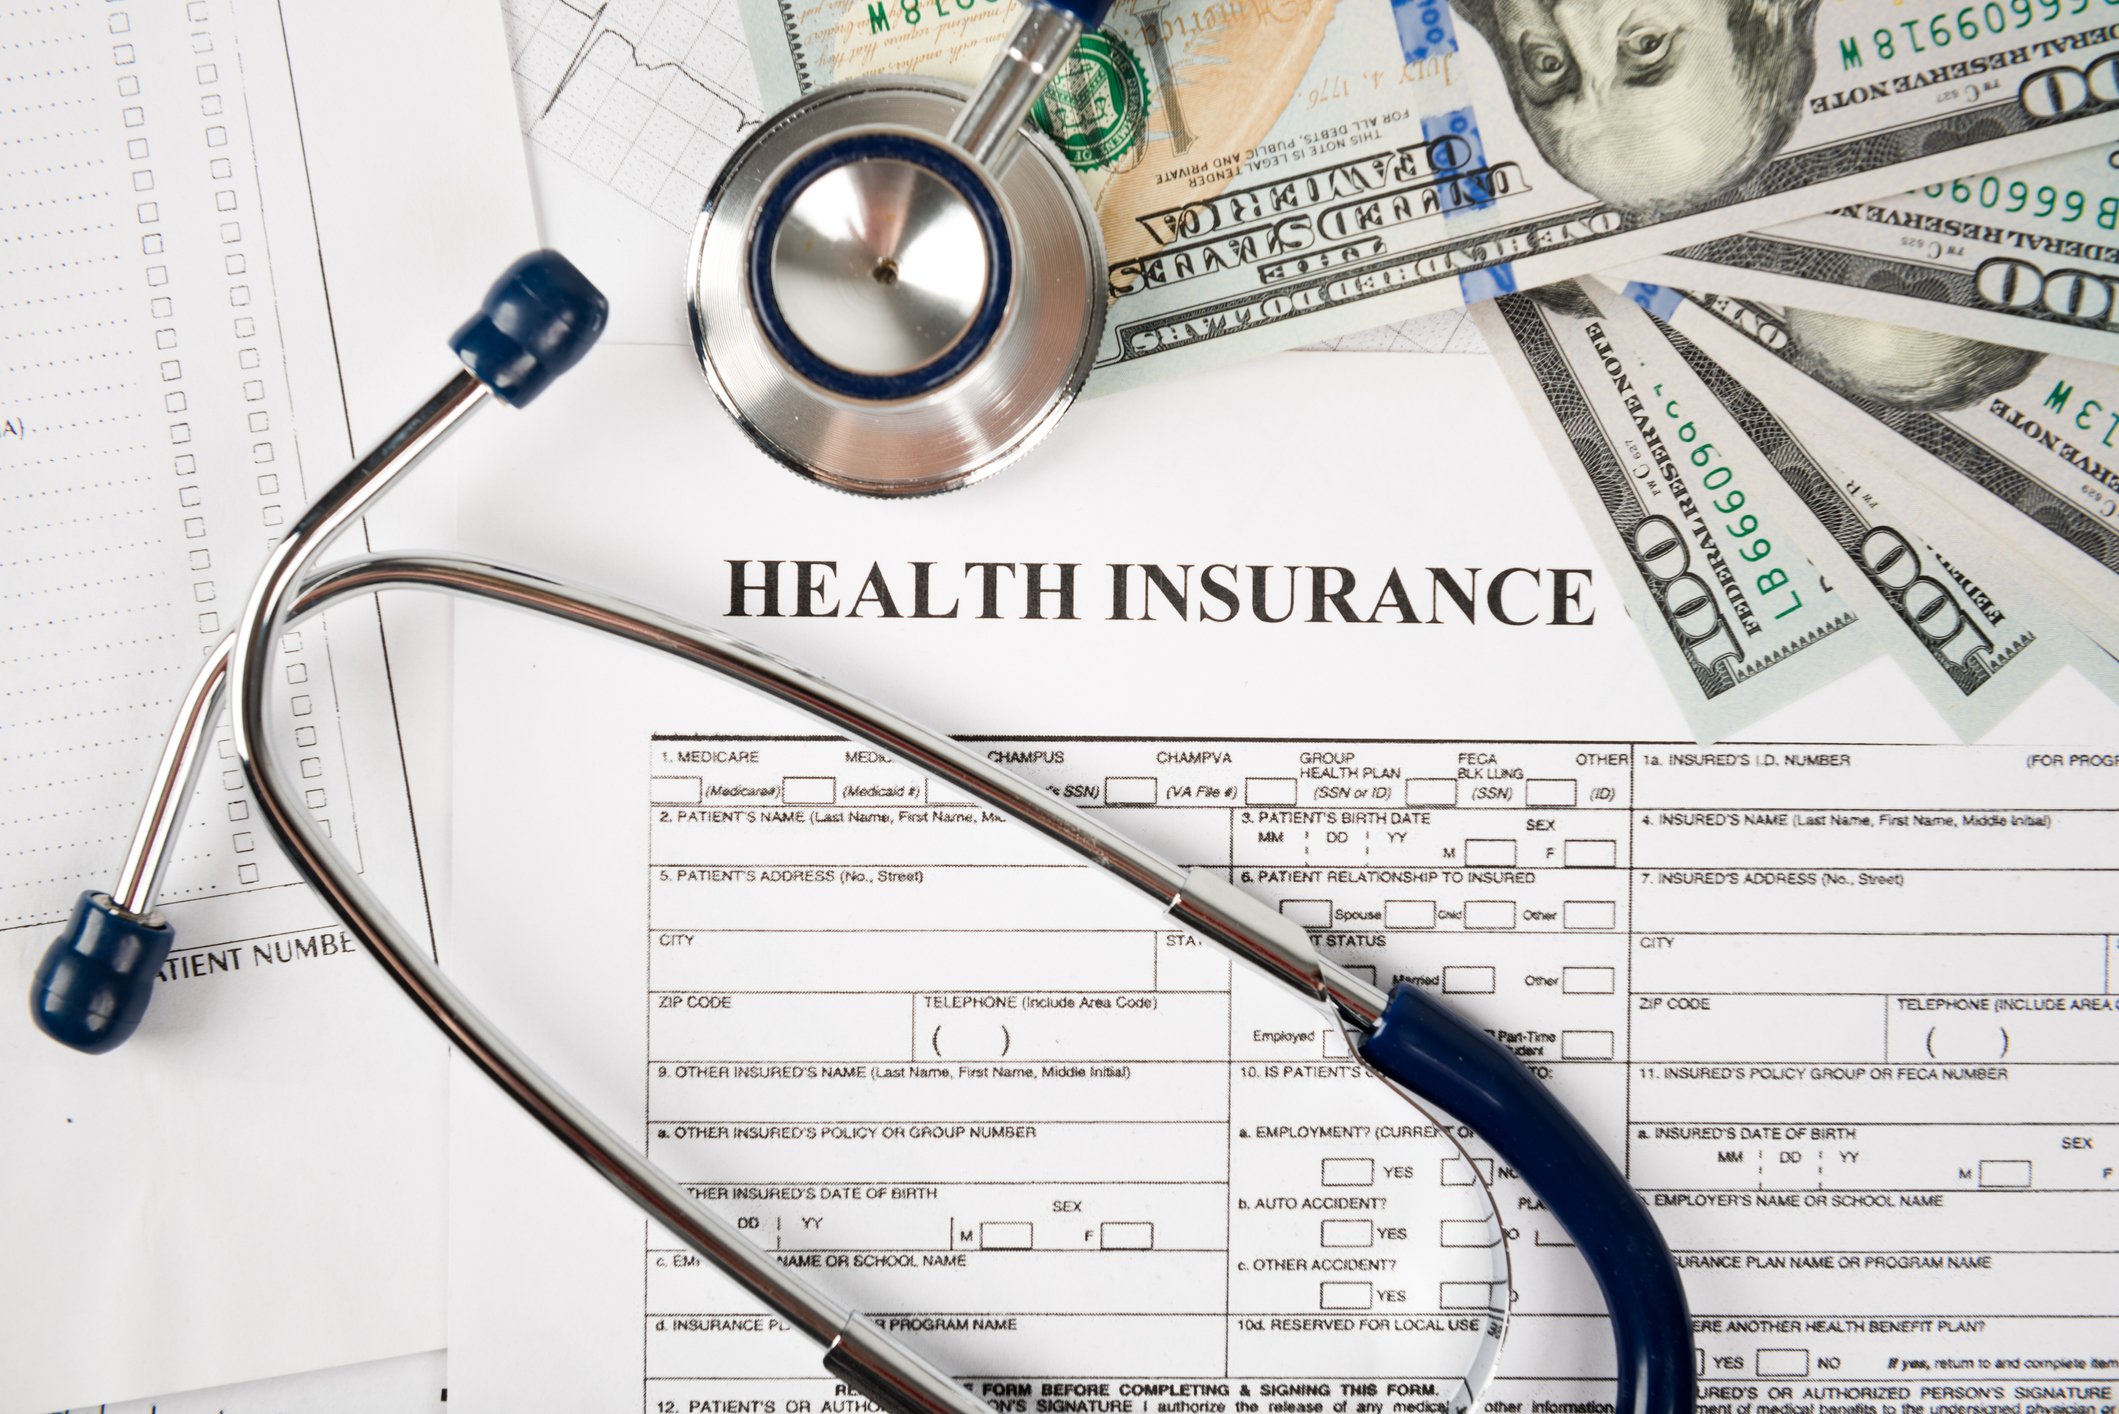 Health insurance costs